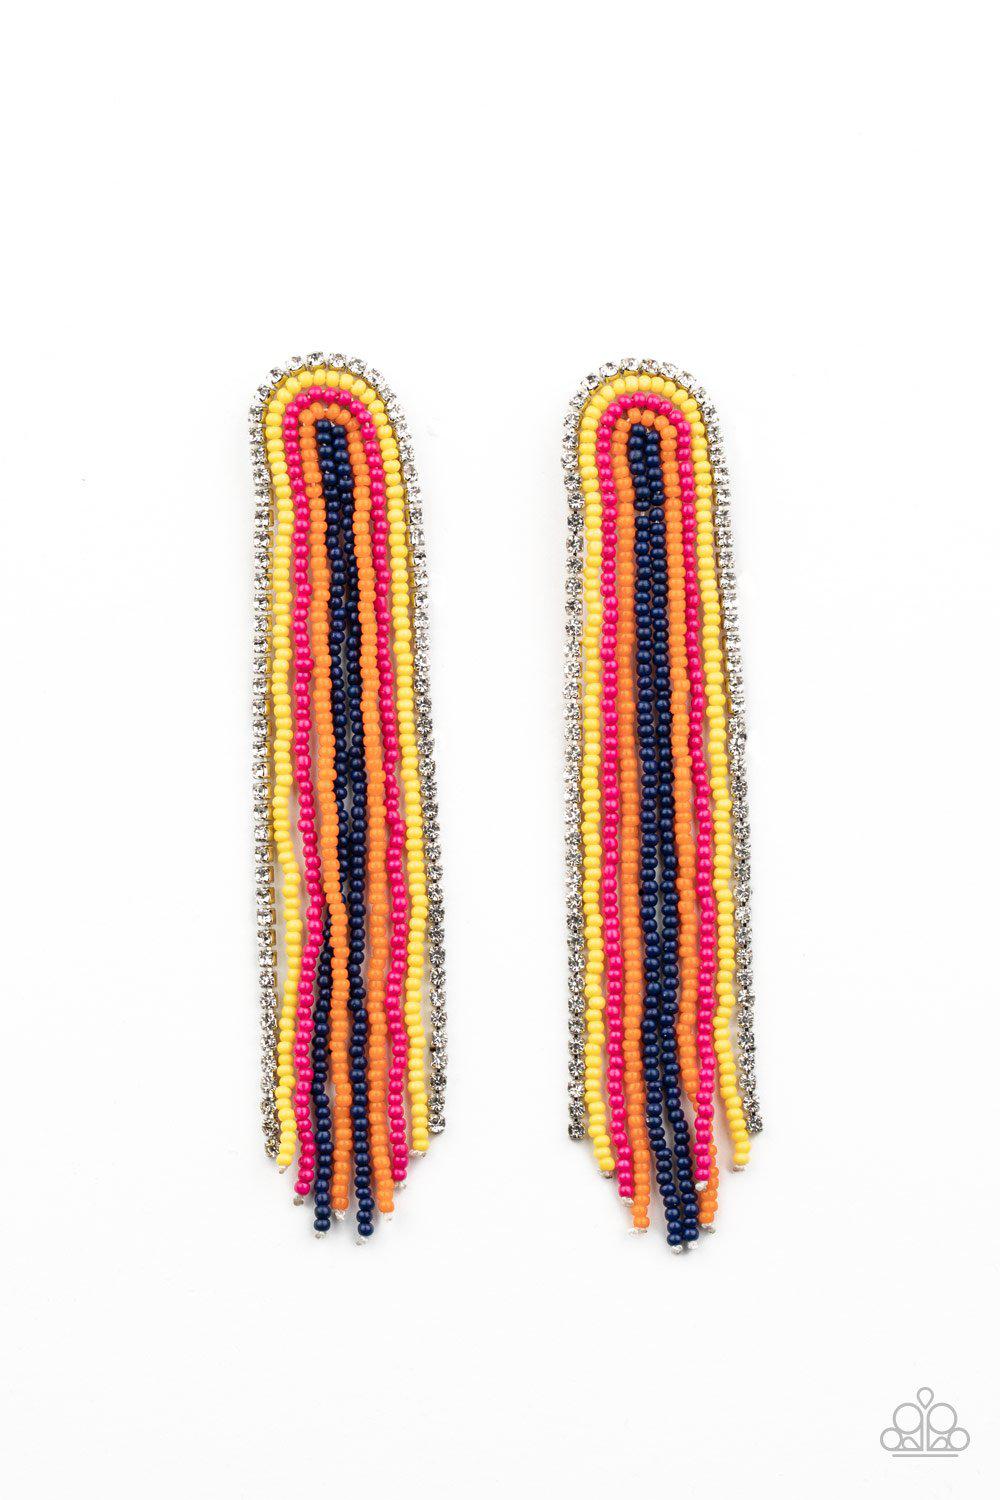 Let There BEAD Light Multicolor Seed Bead and Rhinestone Earrings - Paparazzi Accessories Life of the Party Exclusive December 2020-CarasShop.com - $5 Jewelry by Cara Jewels